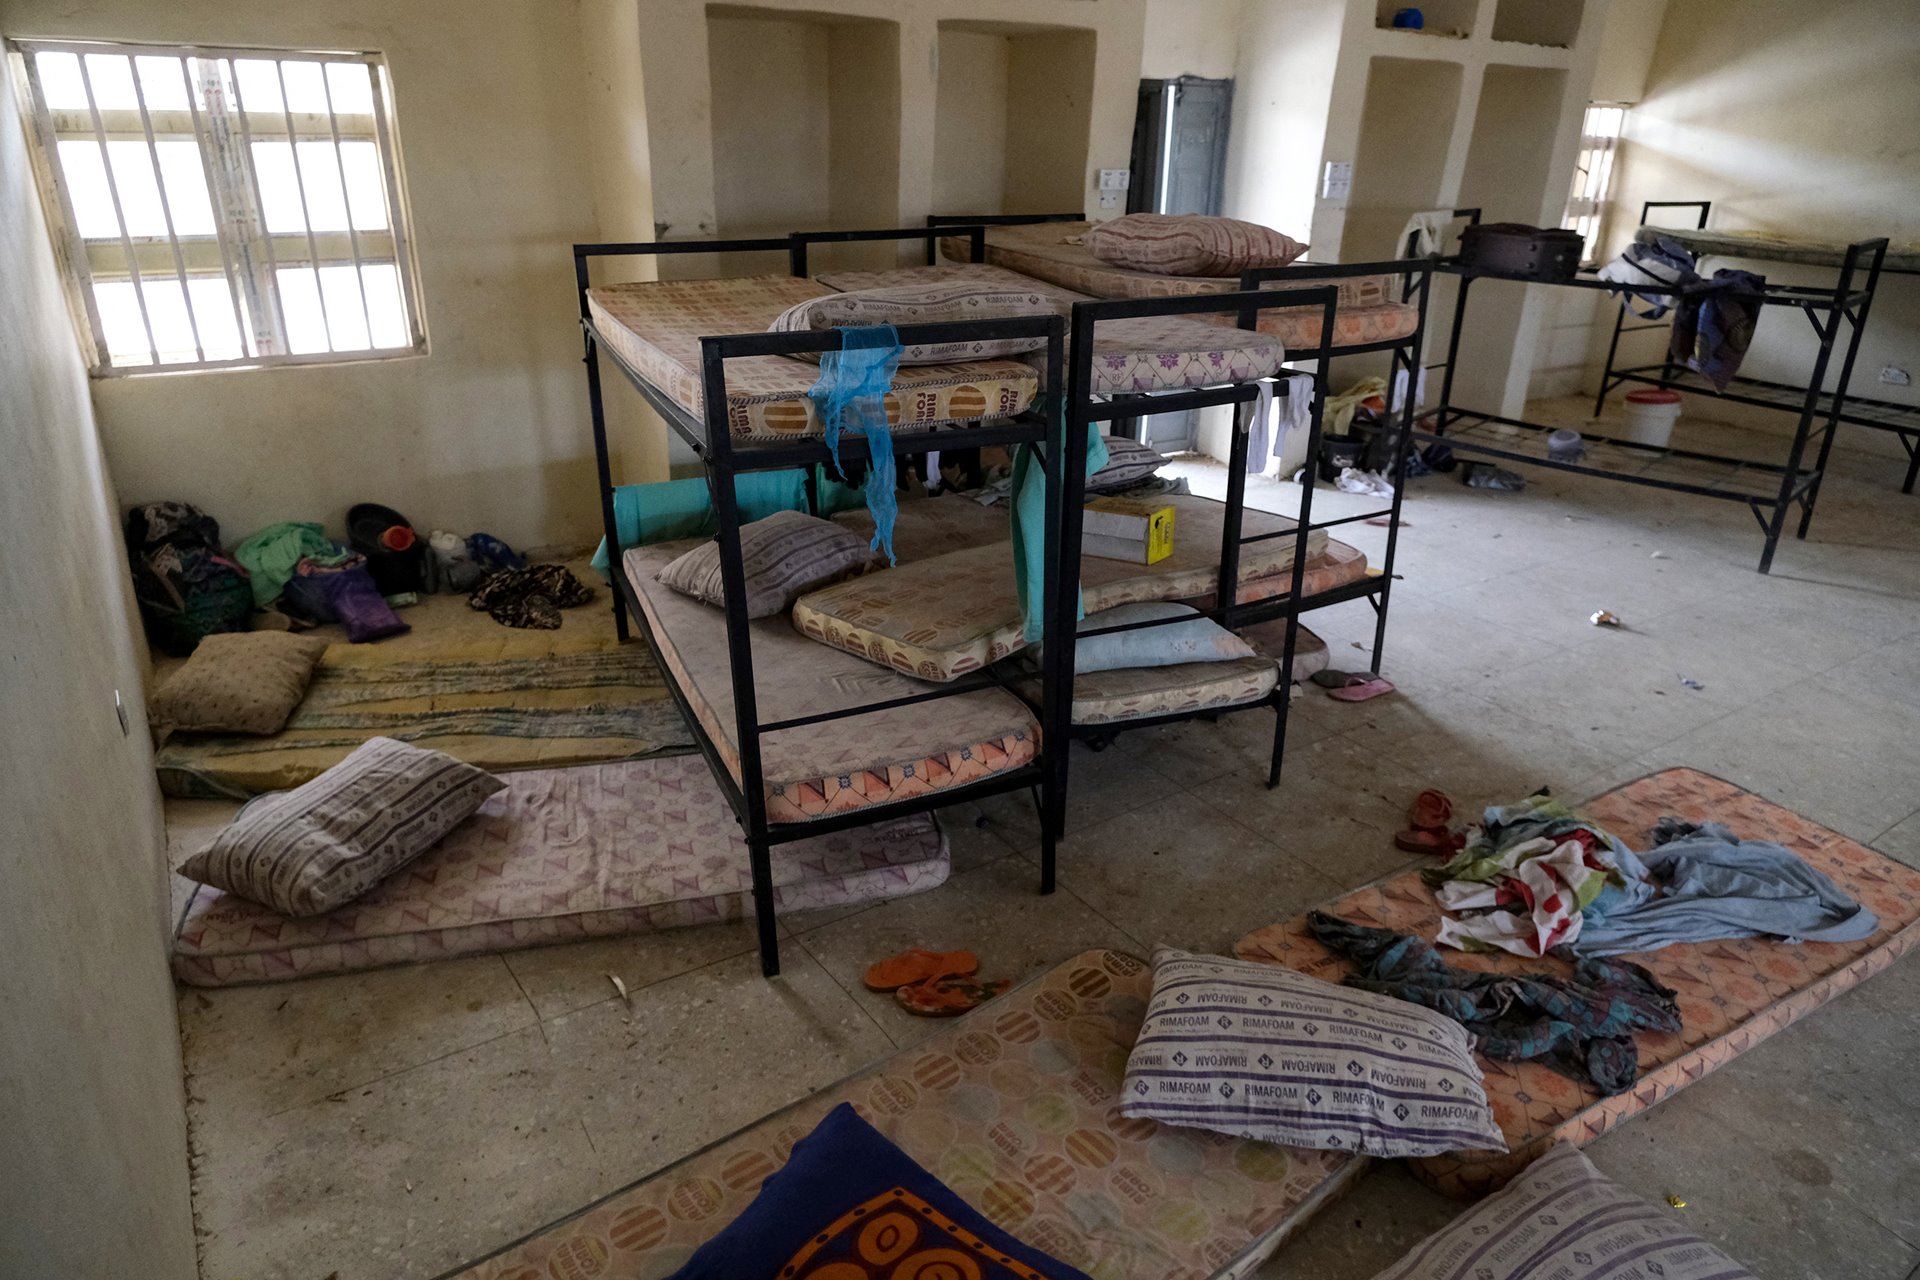 <p>A dormitory lies empty at the Government Girls Secondary School, Jangebe, Zamfara State, northwest Nigeria, on 27 February 2021. Gunmen, apparently from a bandit group, kidnapped 279 girls from dormitories at the school in the middle of the previous night.</p>
